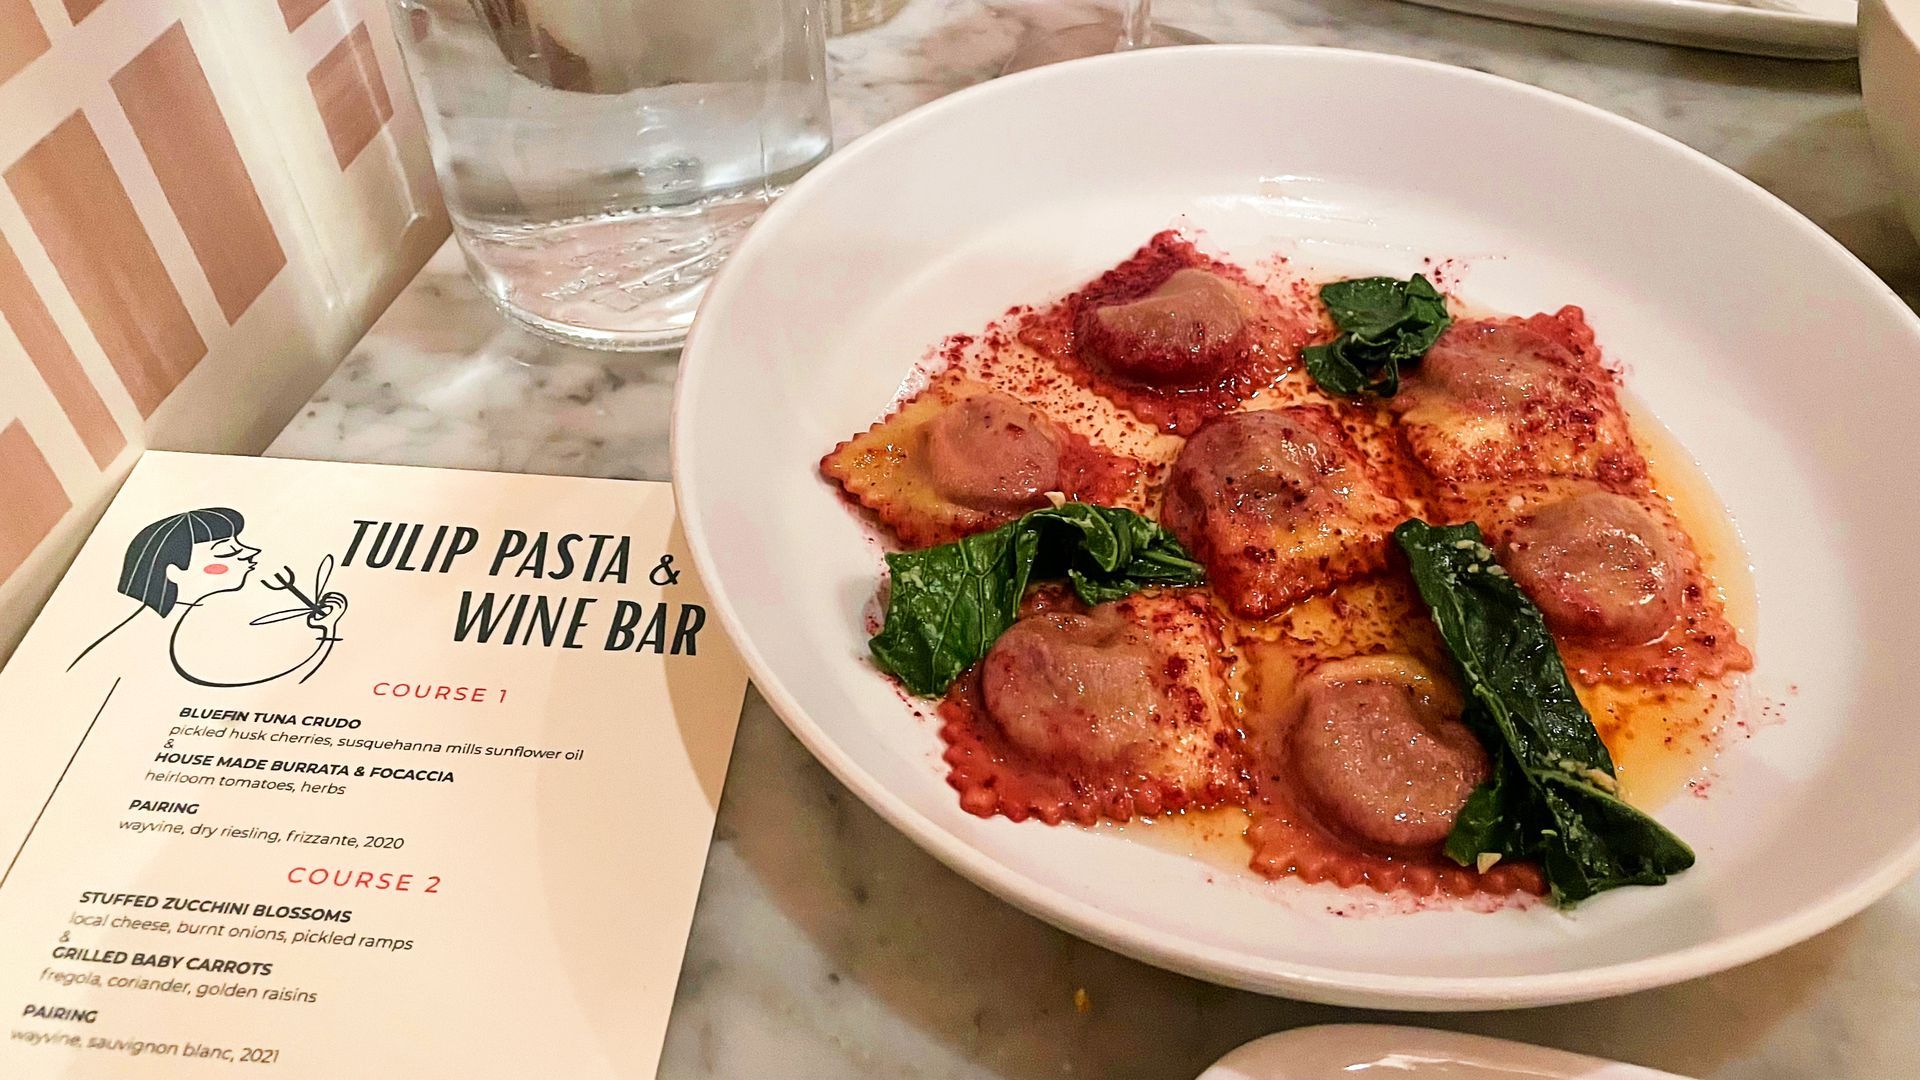 A plate of ravioli next to a menu for Tulip Pasta & Wine Bar in Fishtown.